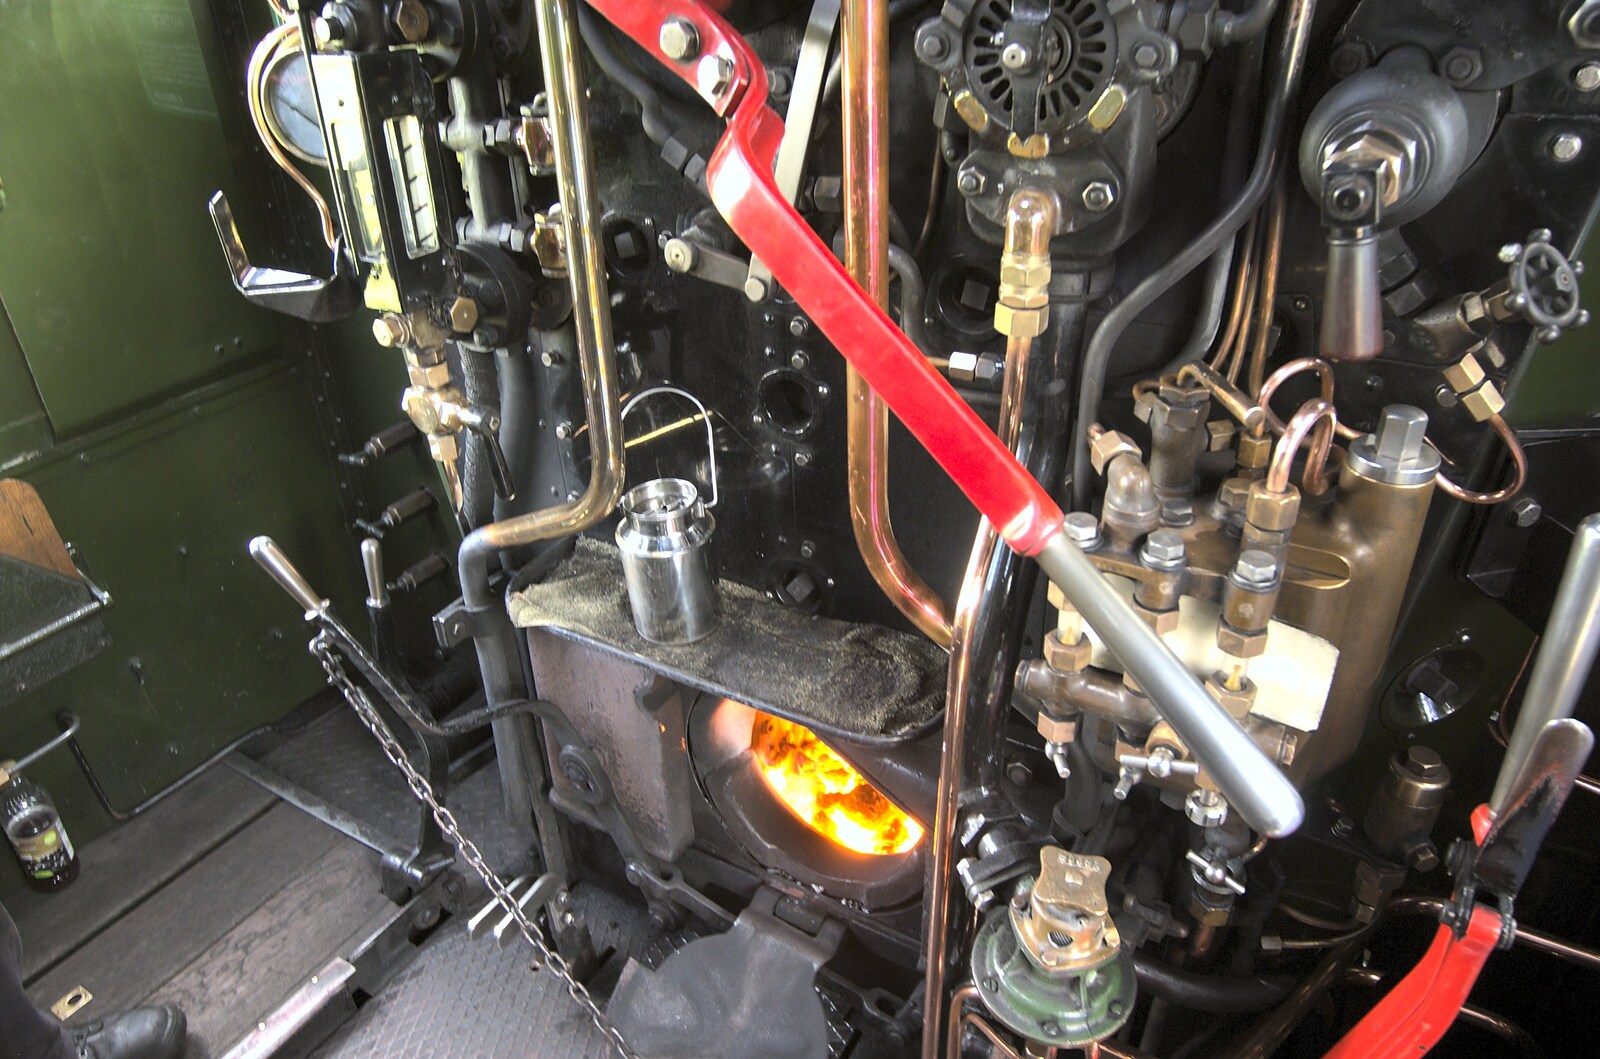 Camping with Trains, Yaxham, Norfolk - 29th August 2010: Lovely shiny bits of steam engine, and fire